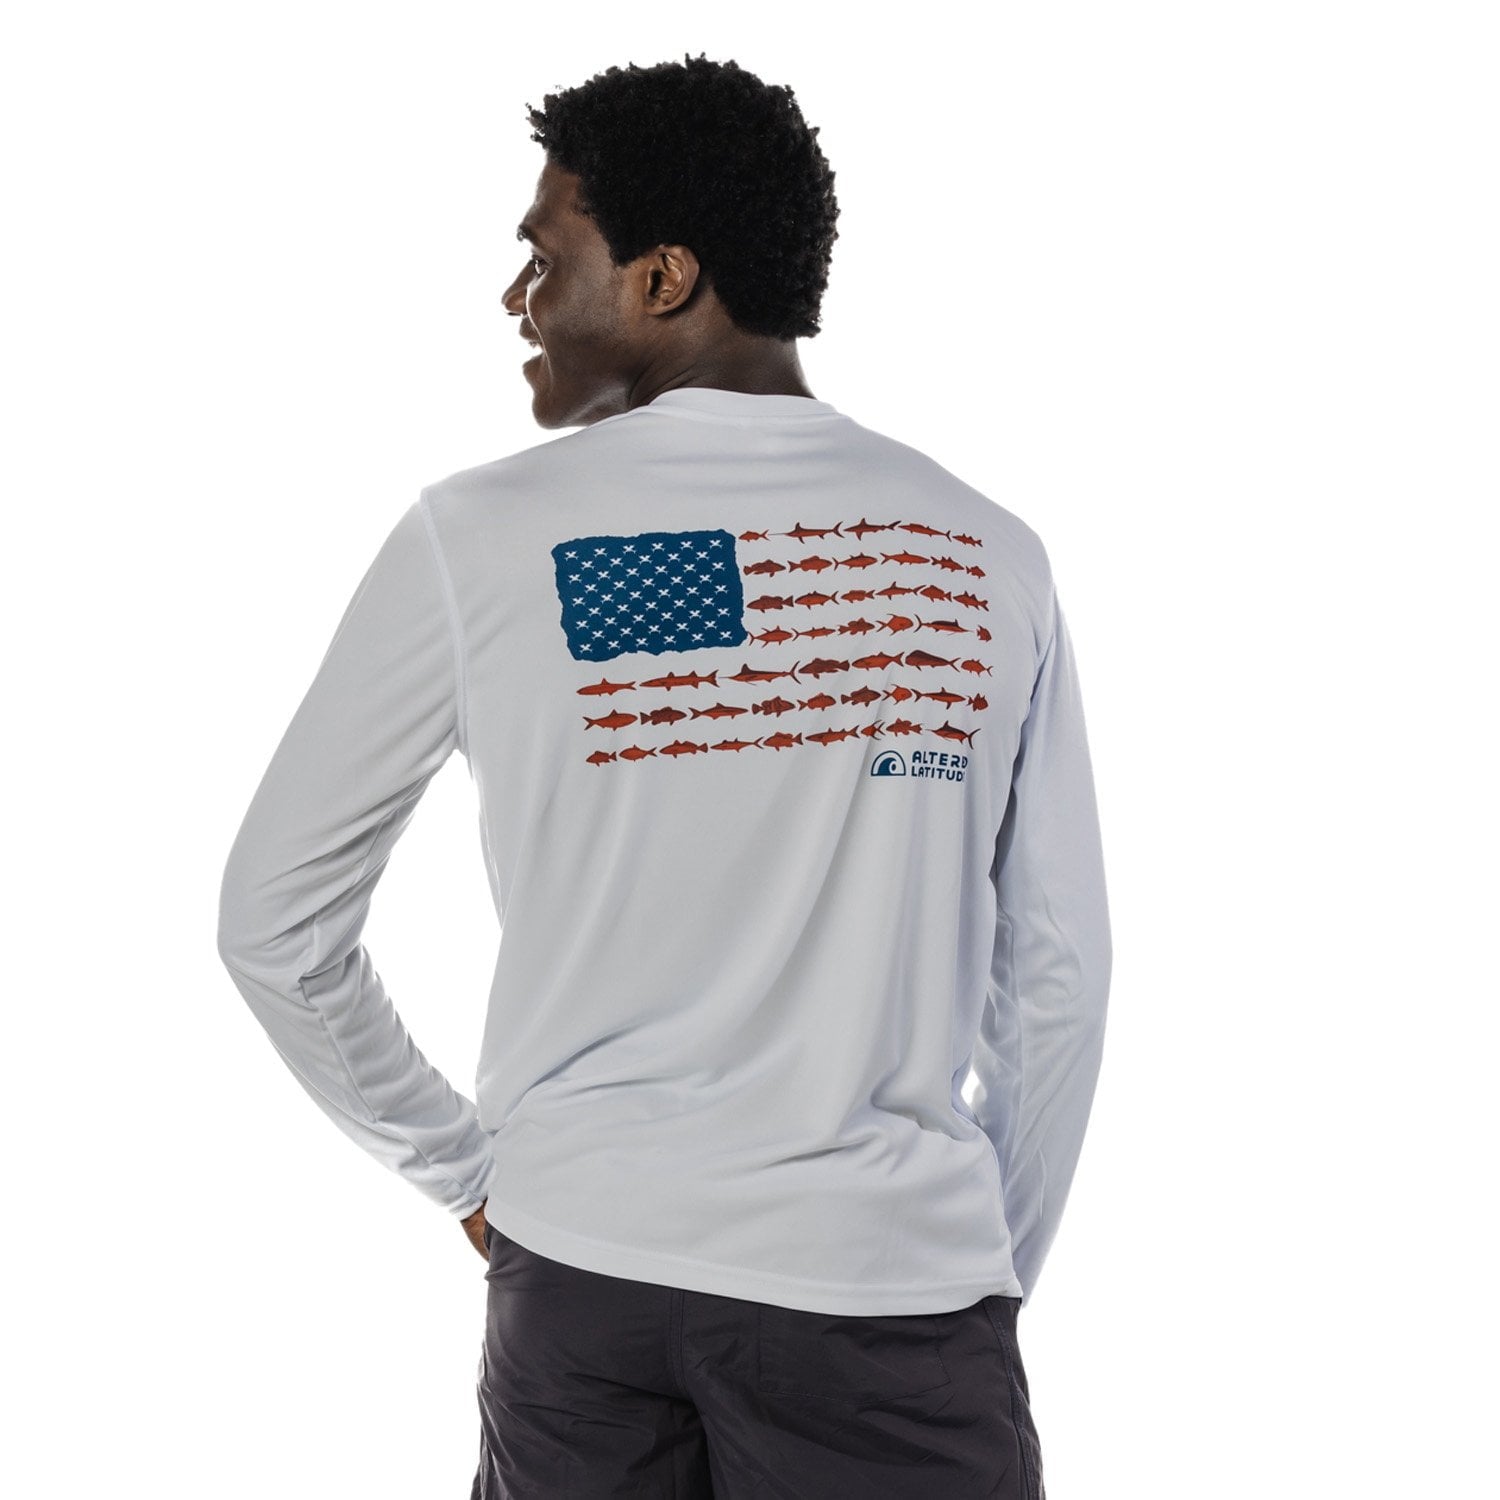 $18.99 White long sleeve with colored flag UPF 40 performance fishing shirt